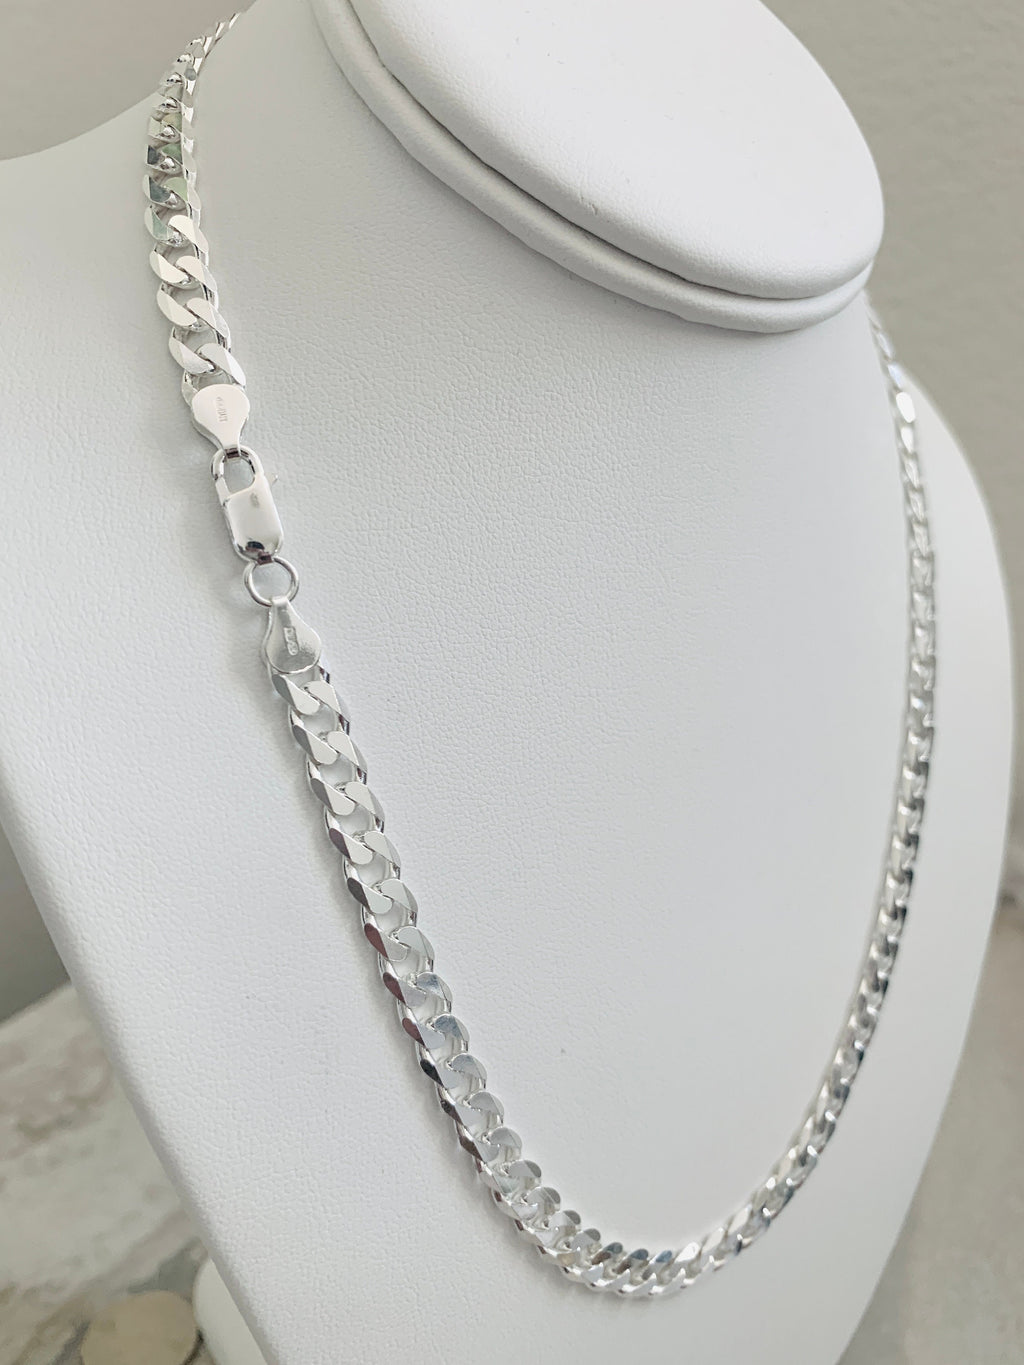 7mm SOLID 925 Cuban Solid Sterling Sliver Curb Chain Silver Chunky Heavy  Miami Necklace Mens Chain Choker 7mm 8mm 9mm 16 18 20 22 24